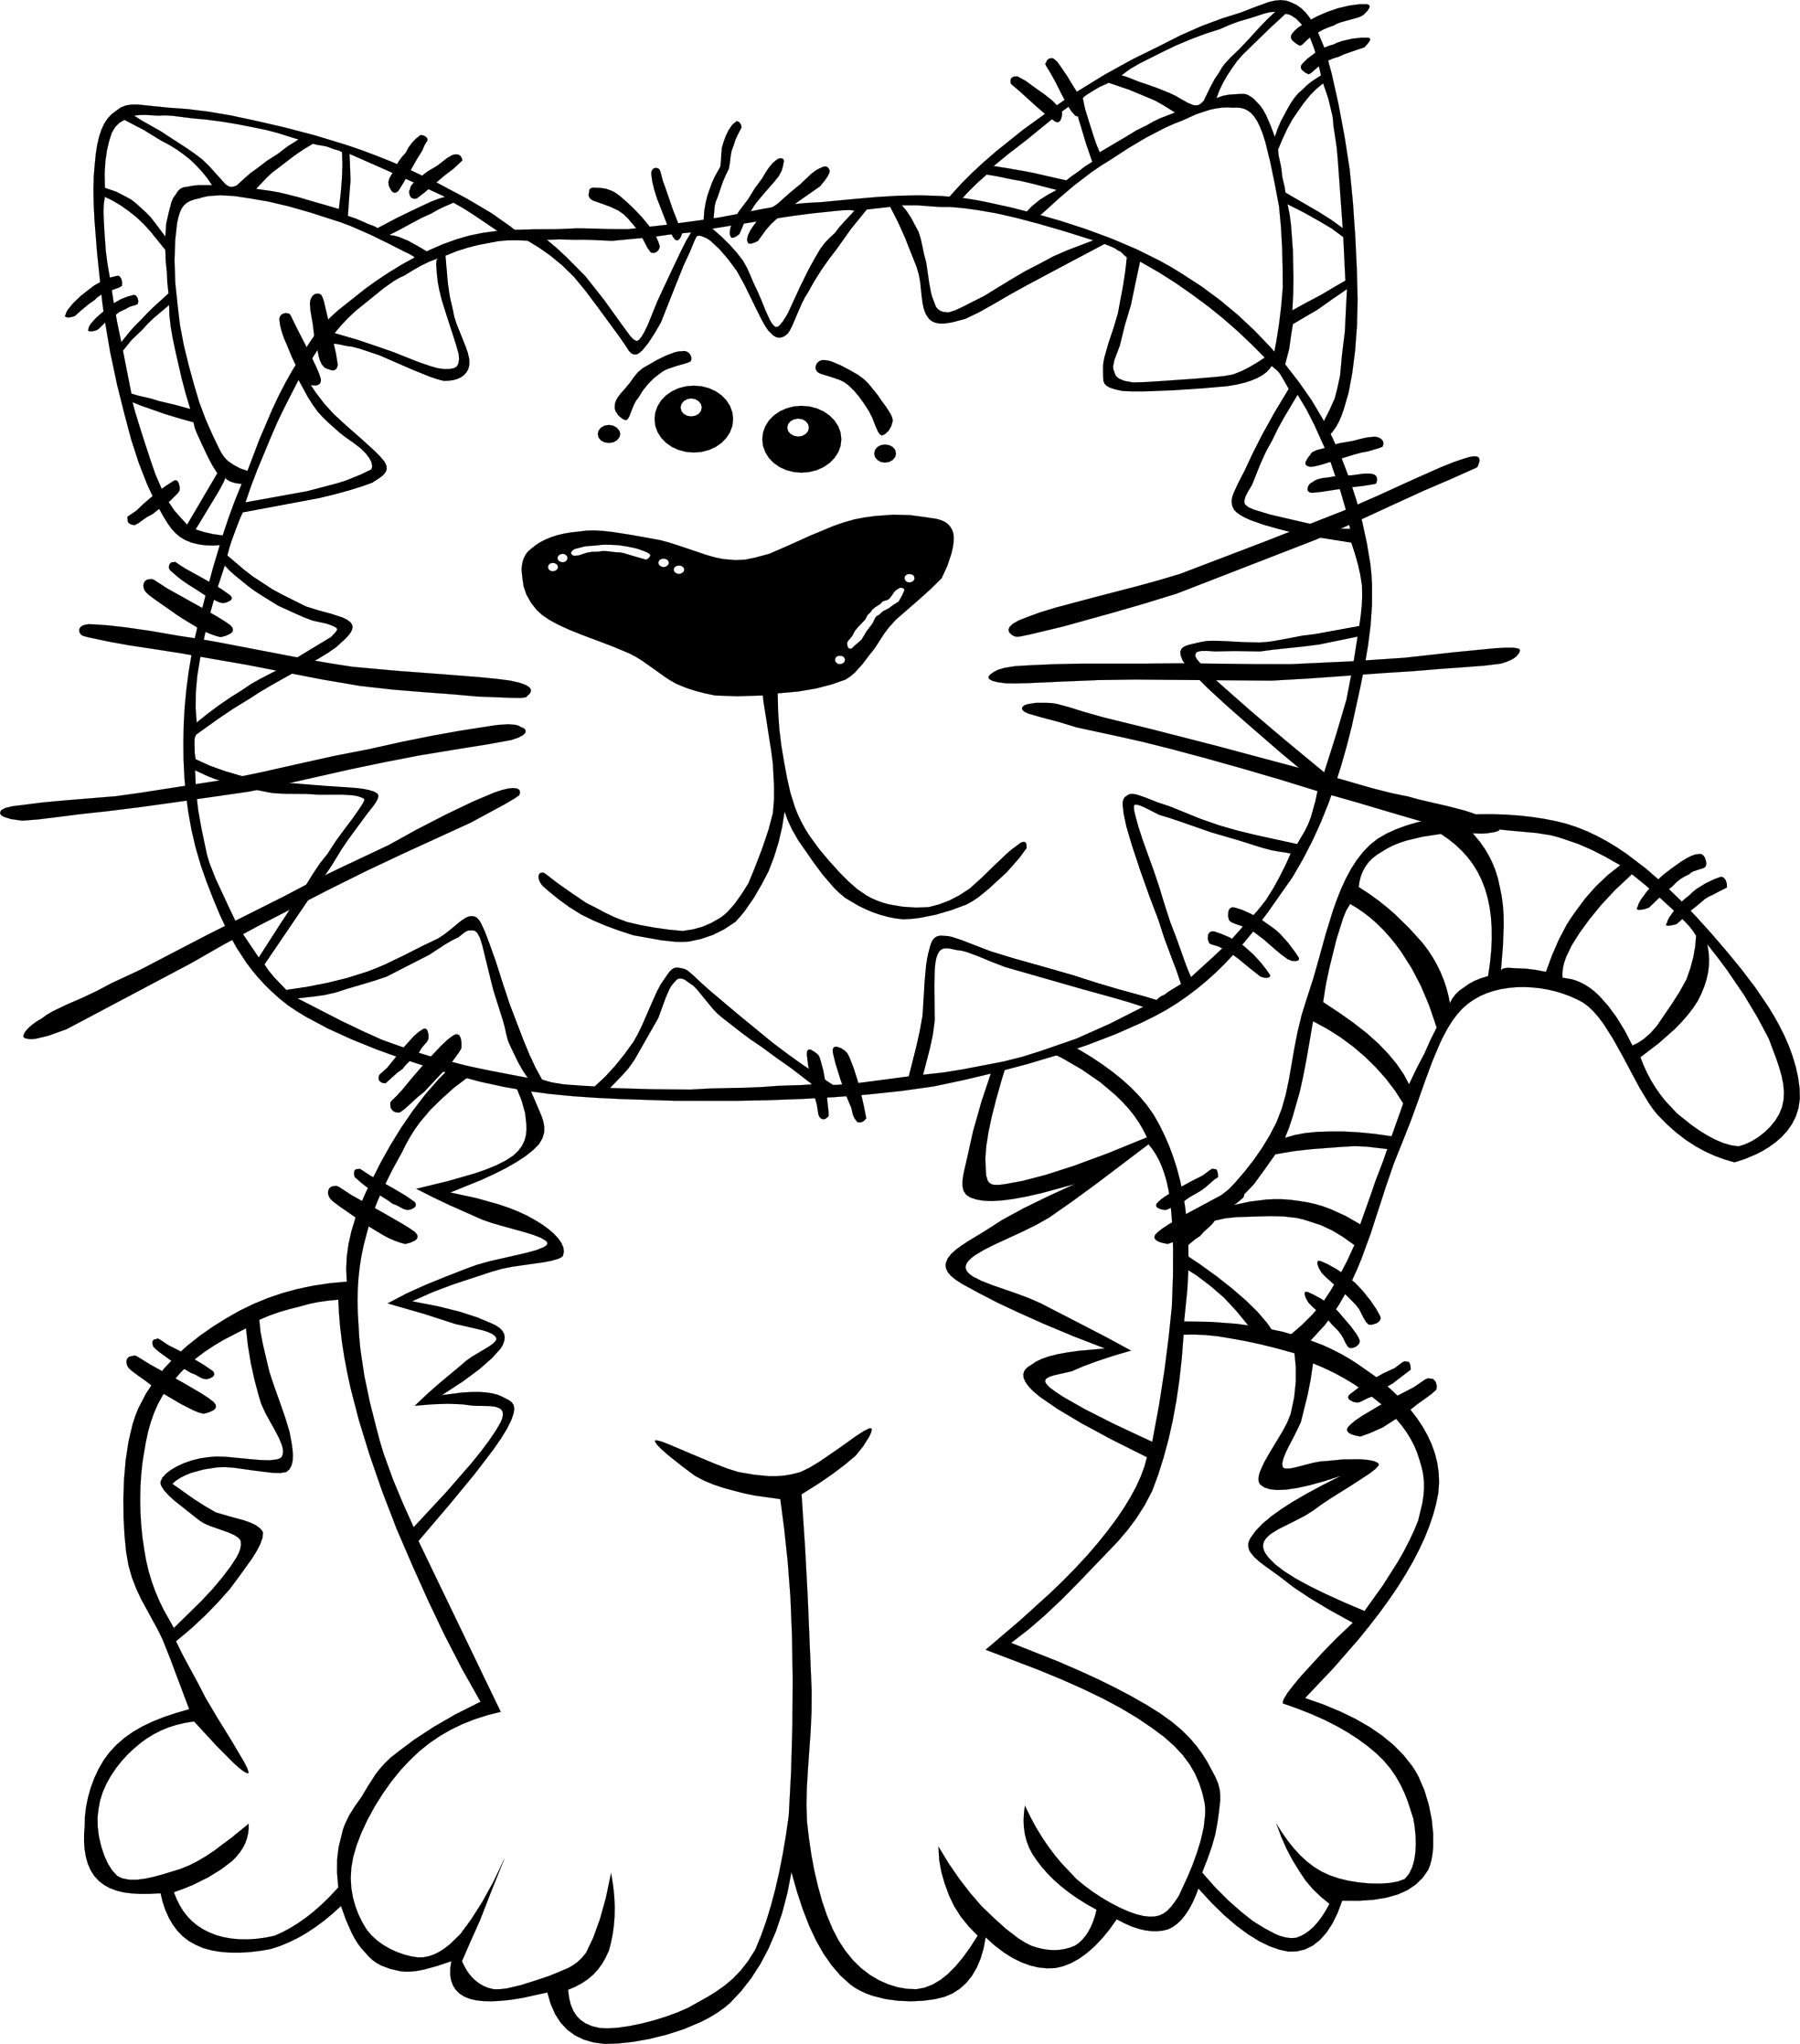 Dog And Cat Clip Art Black And White | Clipart Panda - Free ...